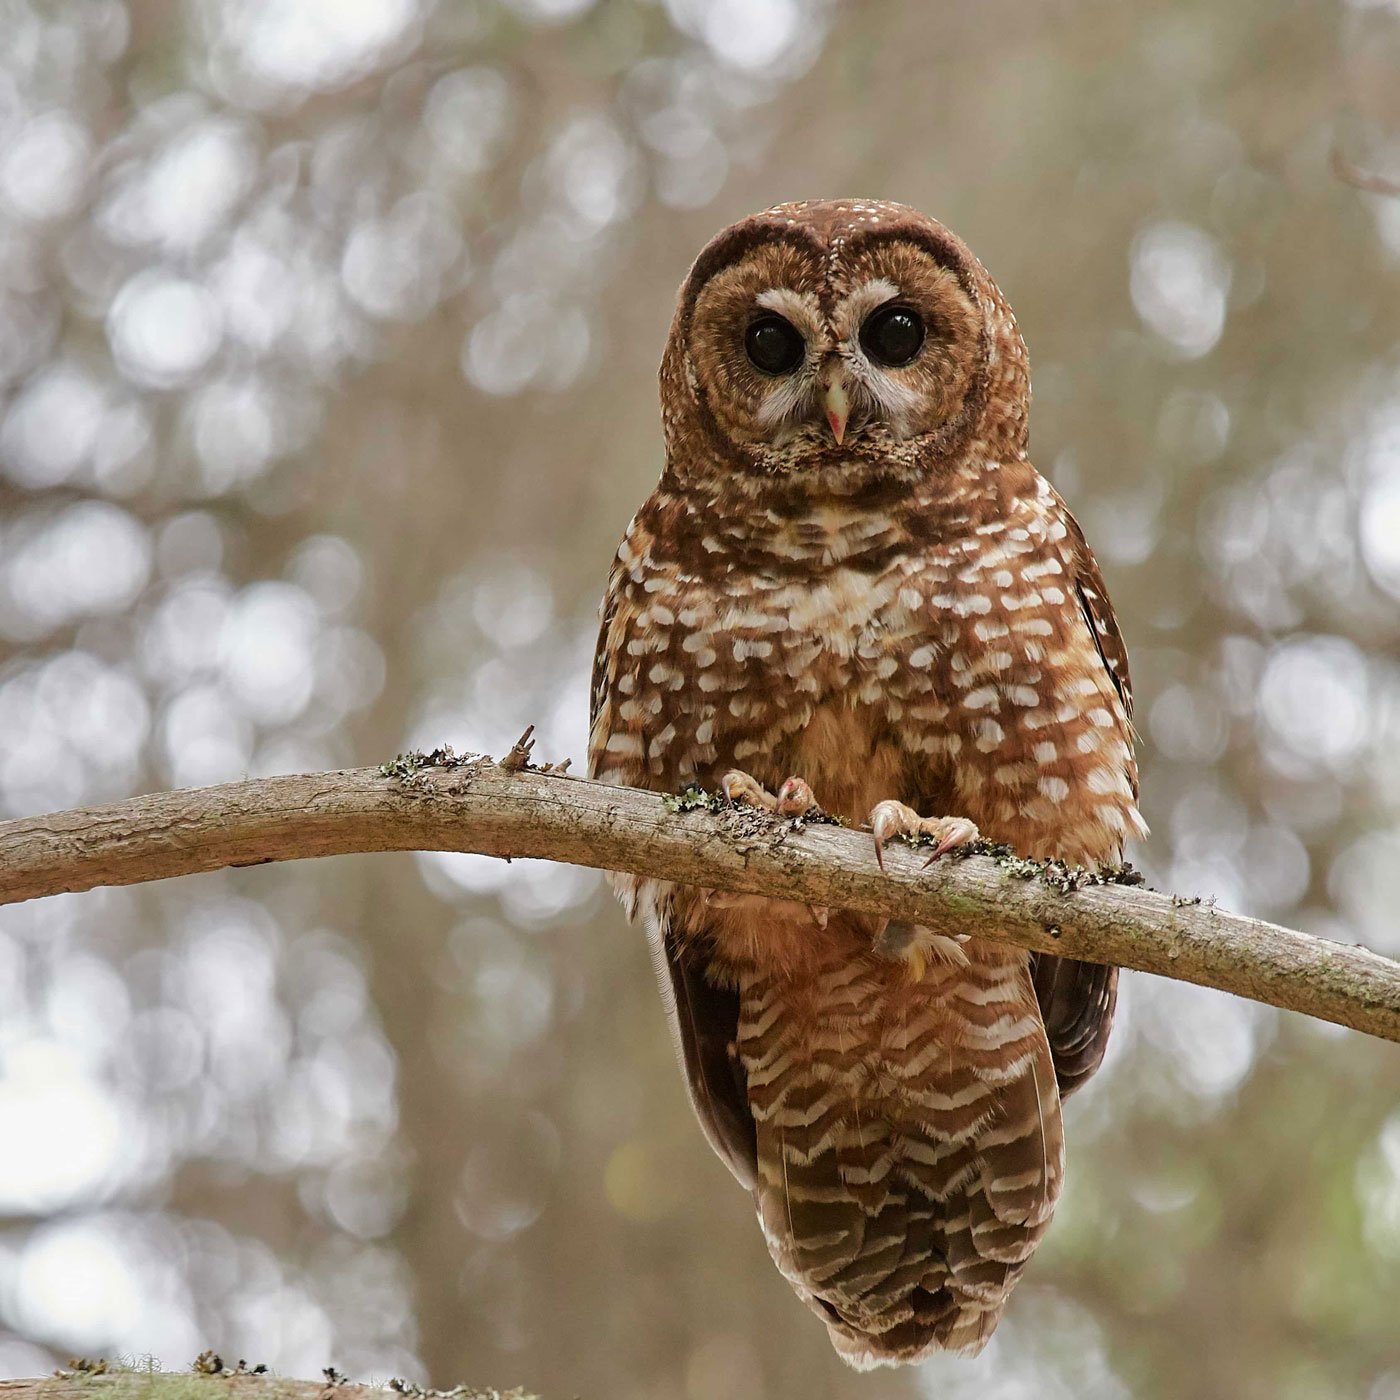 Northern Spotted Owl. Photo by Frank D. Lospalluto, Flickr Creative Commons